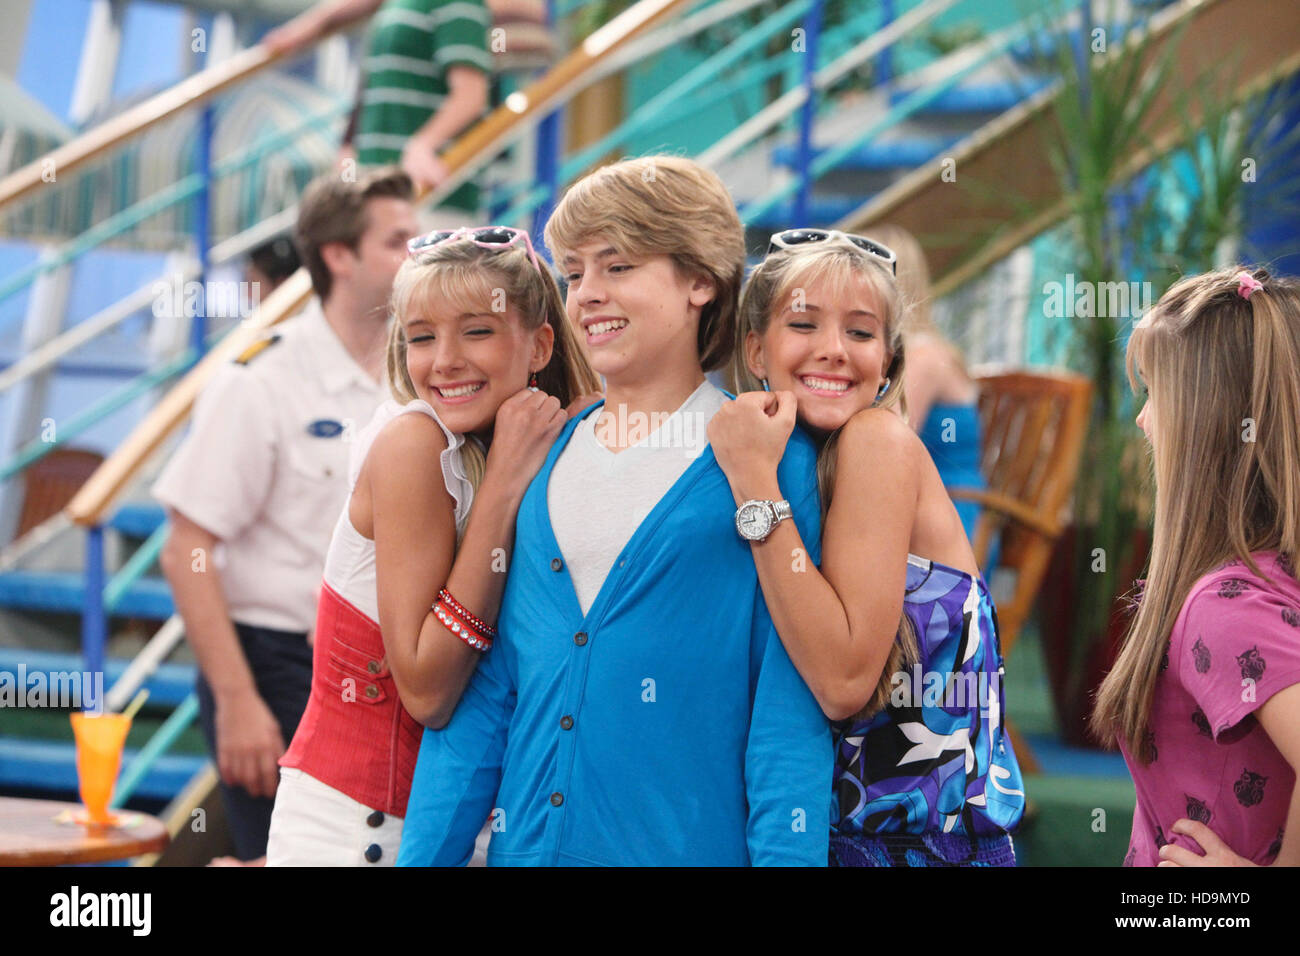 How to watch and stream The Suite Life on Deck - 2008-2014 on Roku